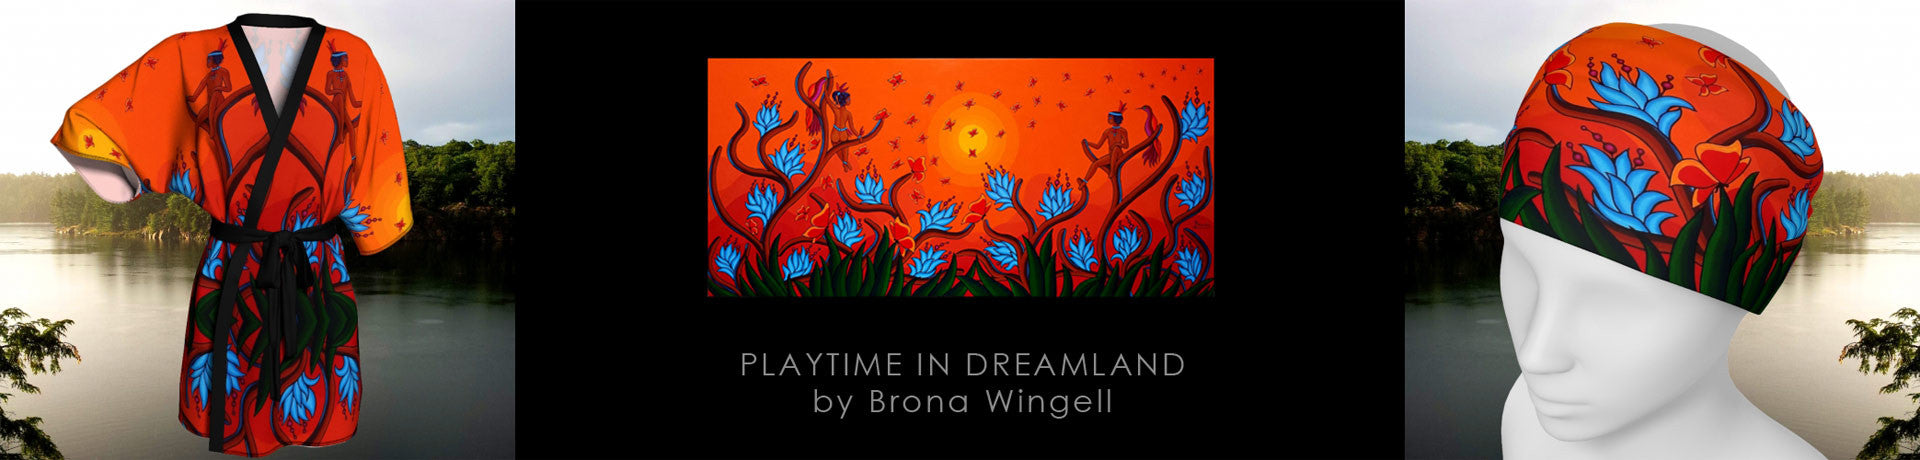 Playtime in Dreamland